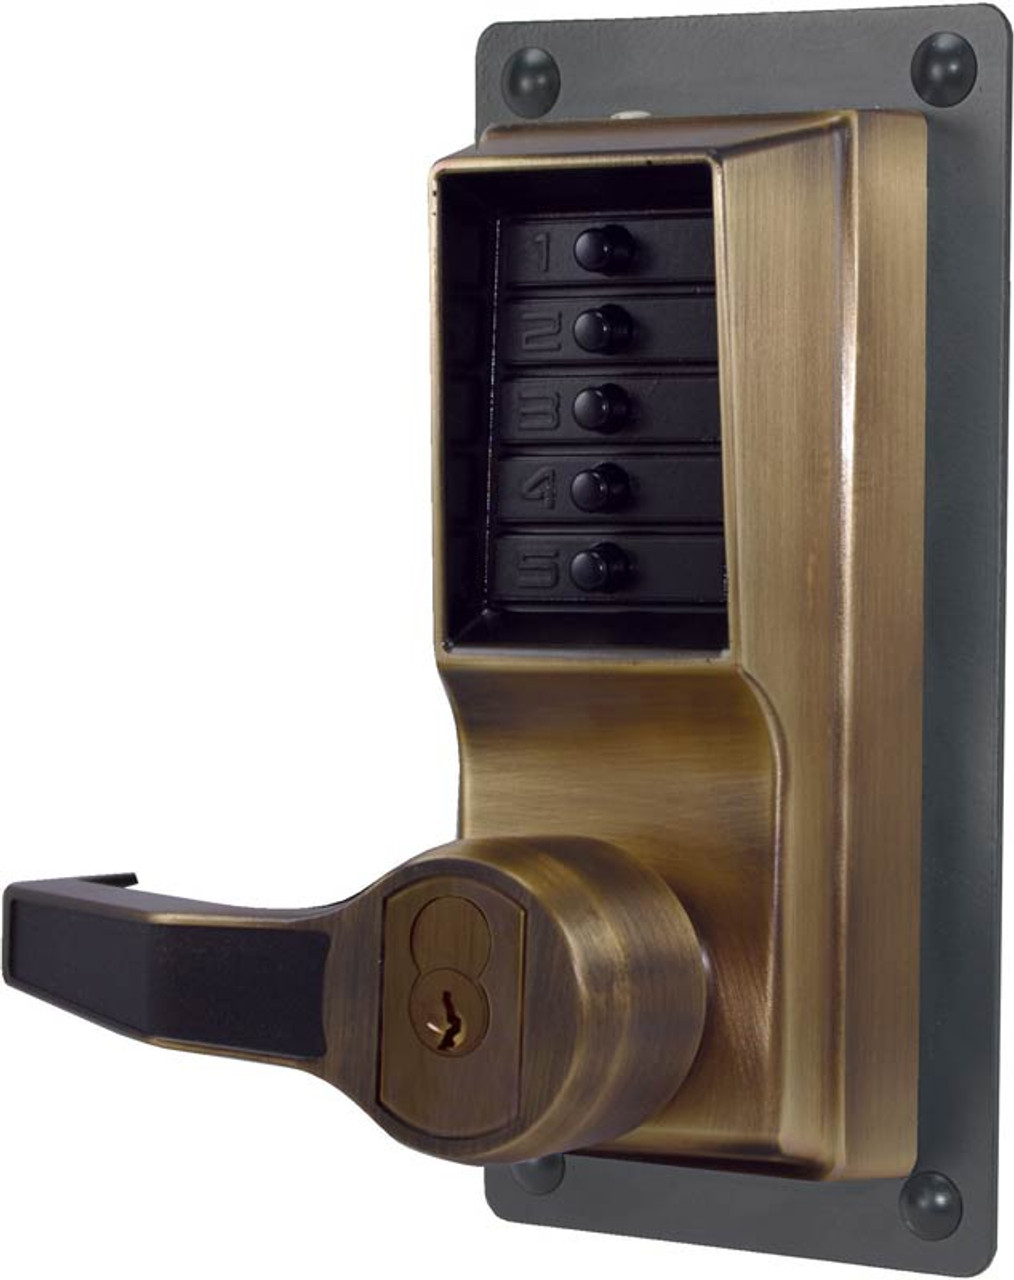 LLP1020M-05 Simplex Exit Trim Lever with Medeco Removable Core Key Override option in Antique Brass finish